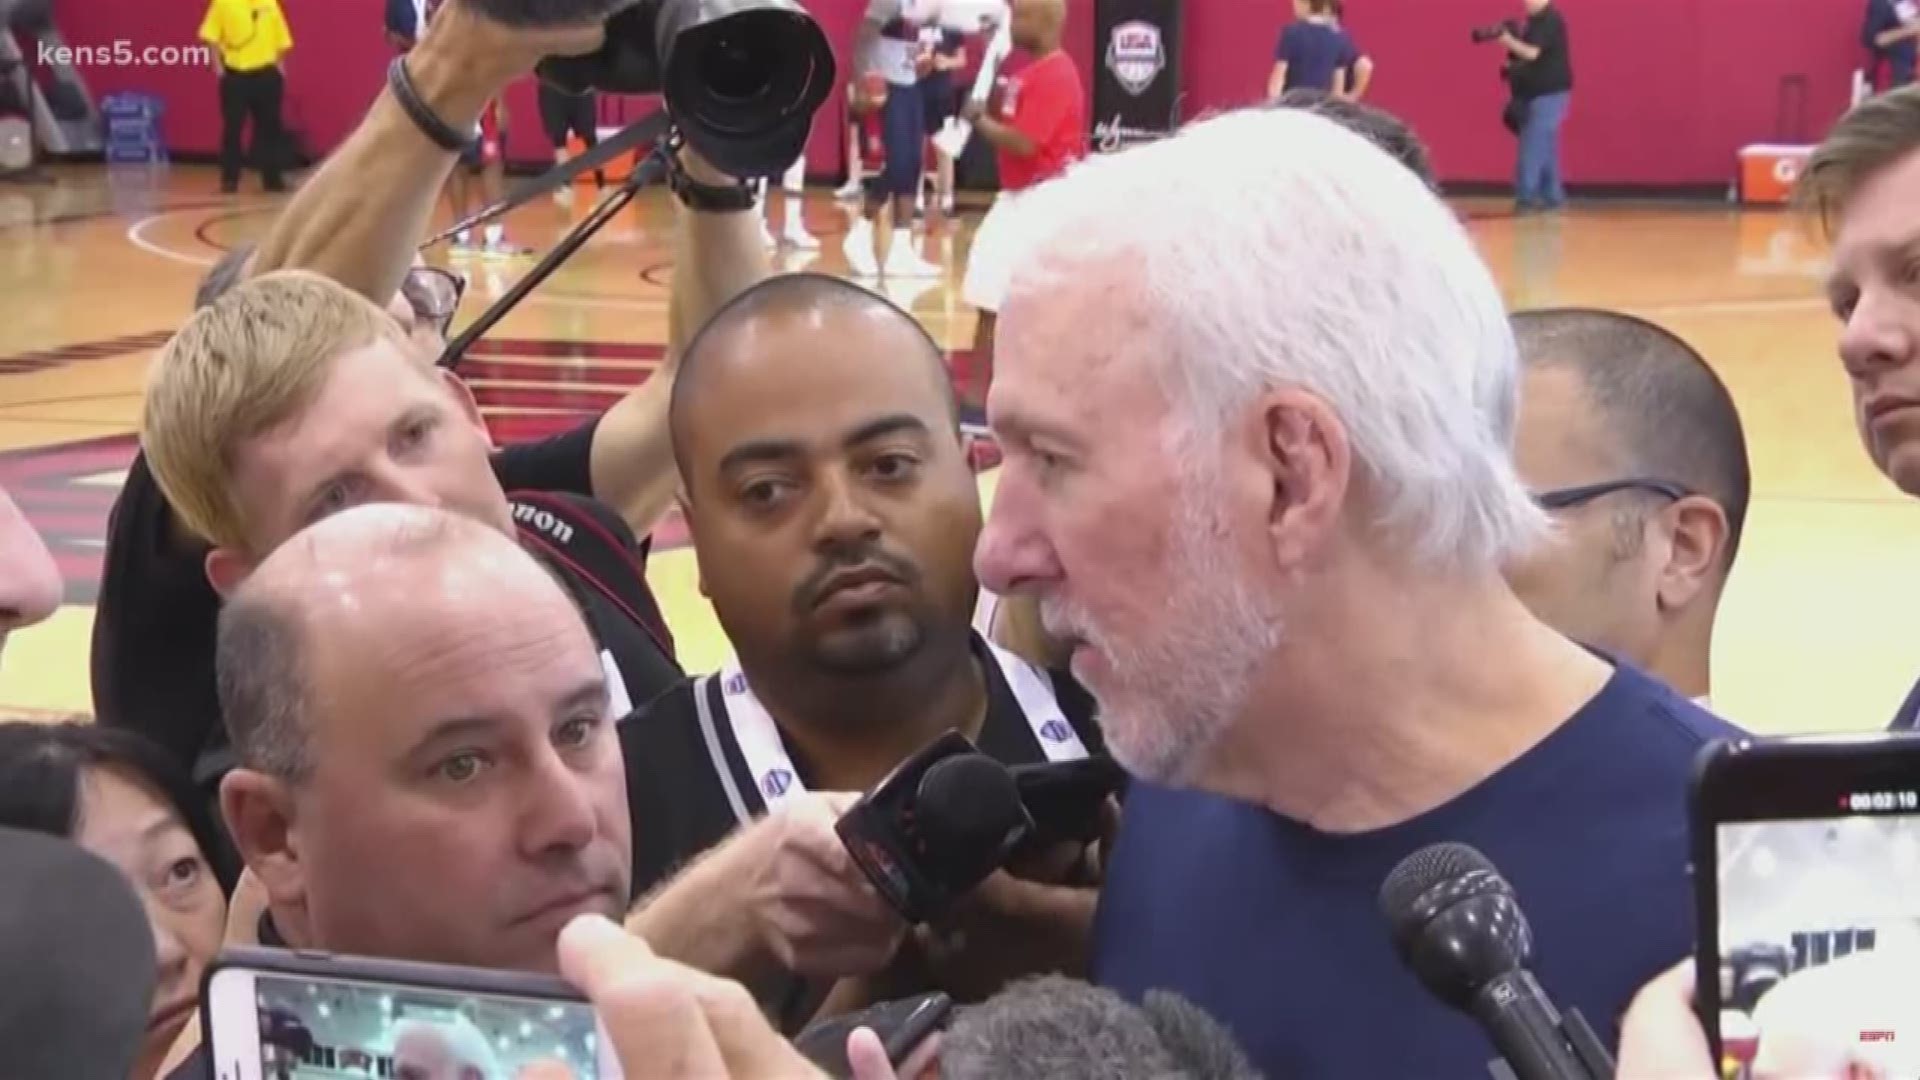 San Antonio Spurs coach Gregg Popovich is handling questions from the media the same as usual, even in his role as the head coach of USA Basketball.